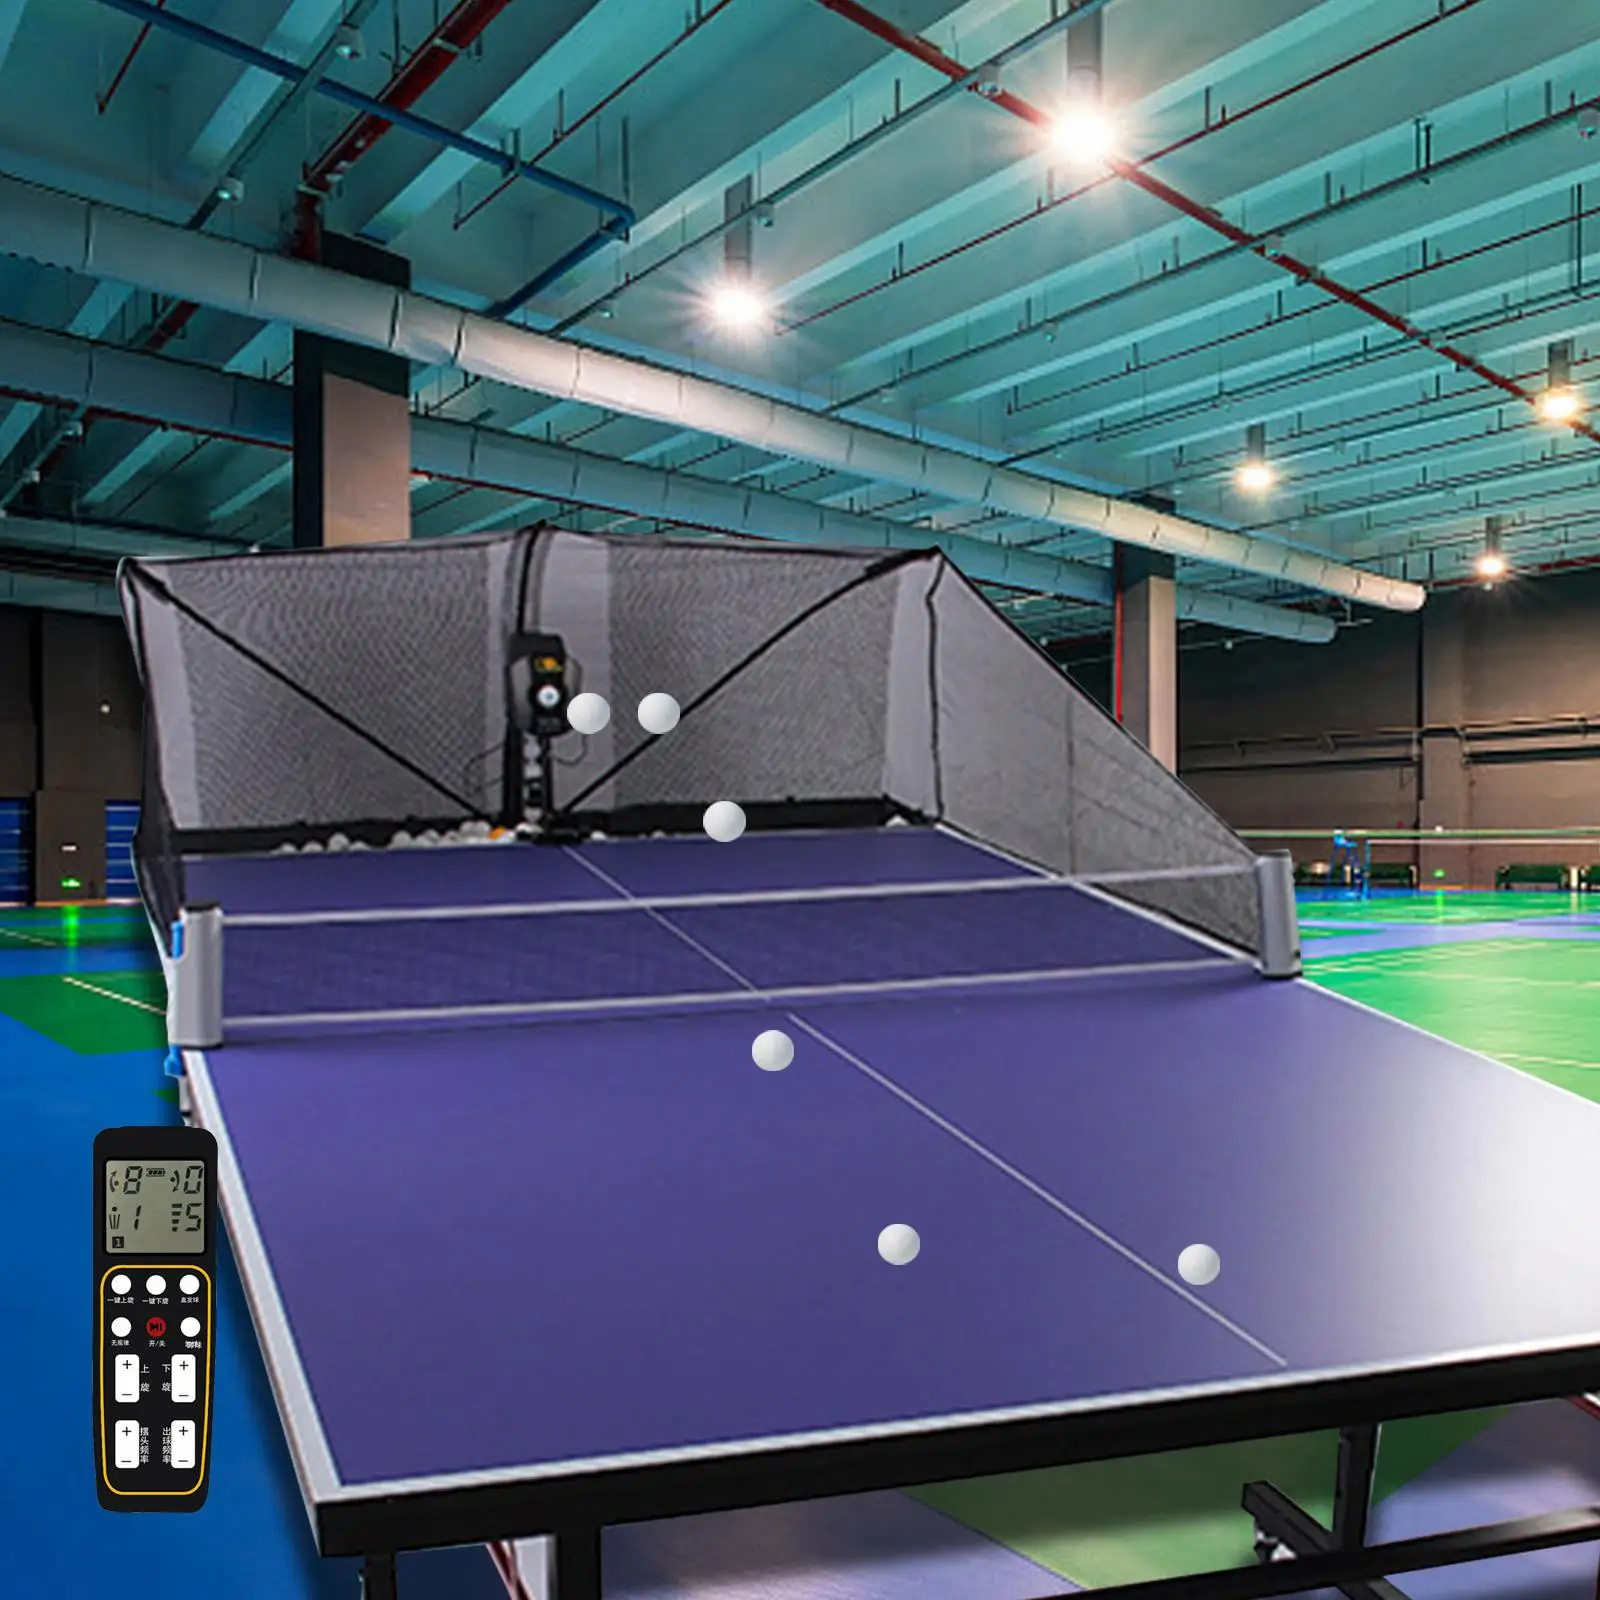 Table Tennis Ball Machine with Ball Collet Catching Net, Ping Pong Robot Trainer for Beginners Exercise